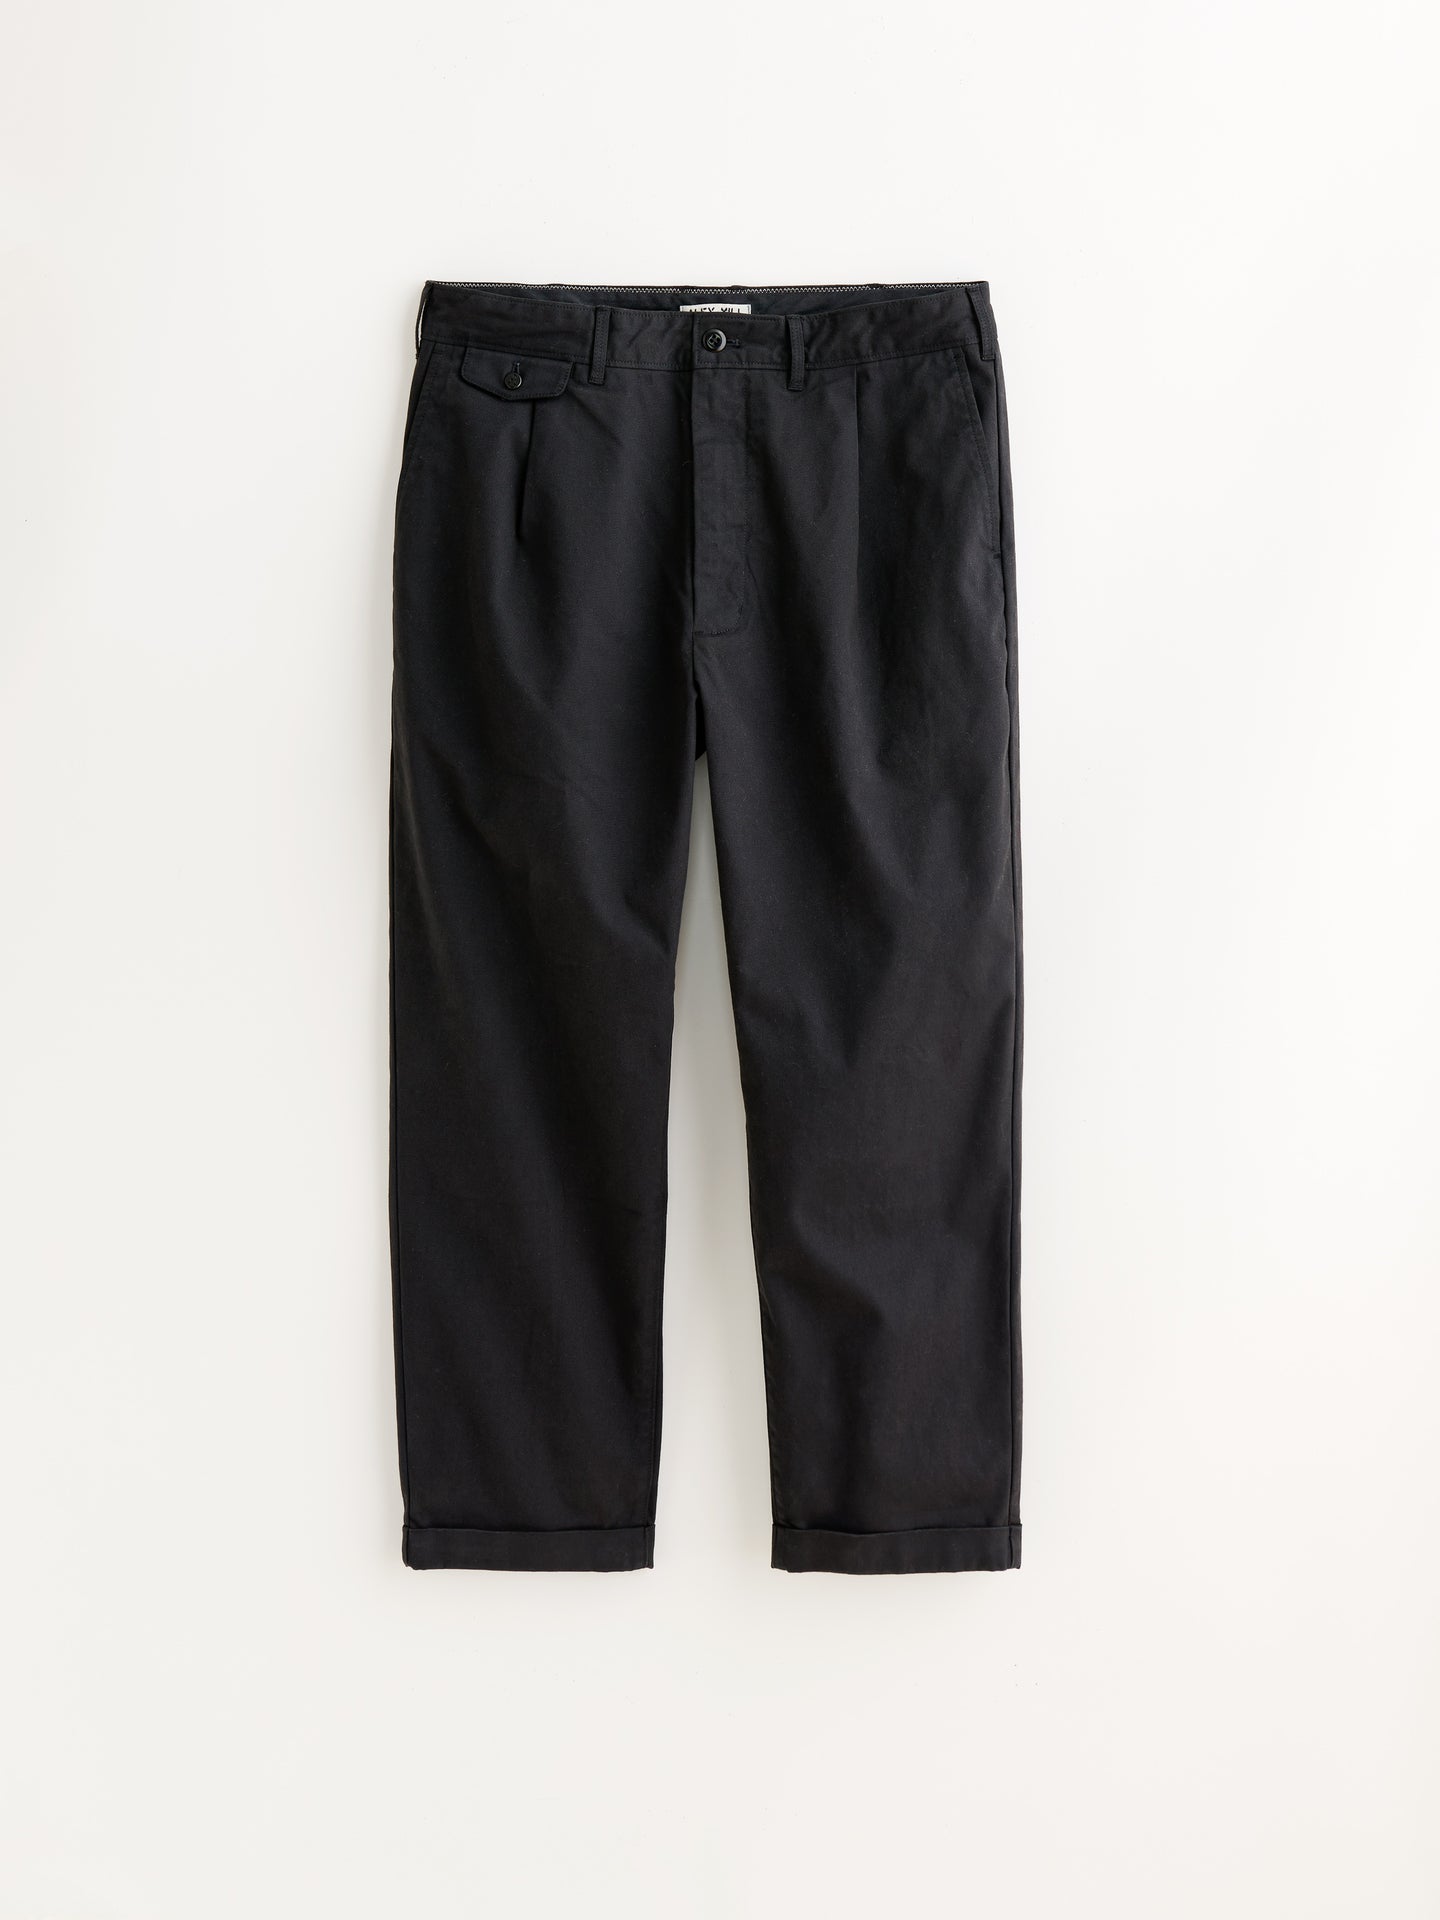 Standard Pleated Pant in Chino - Black